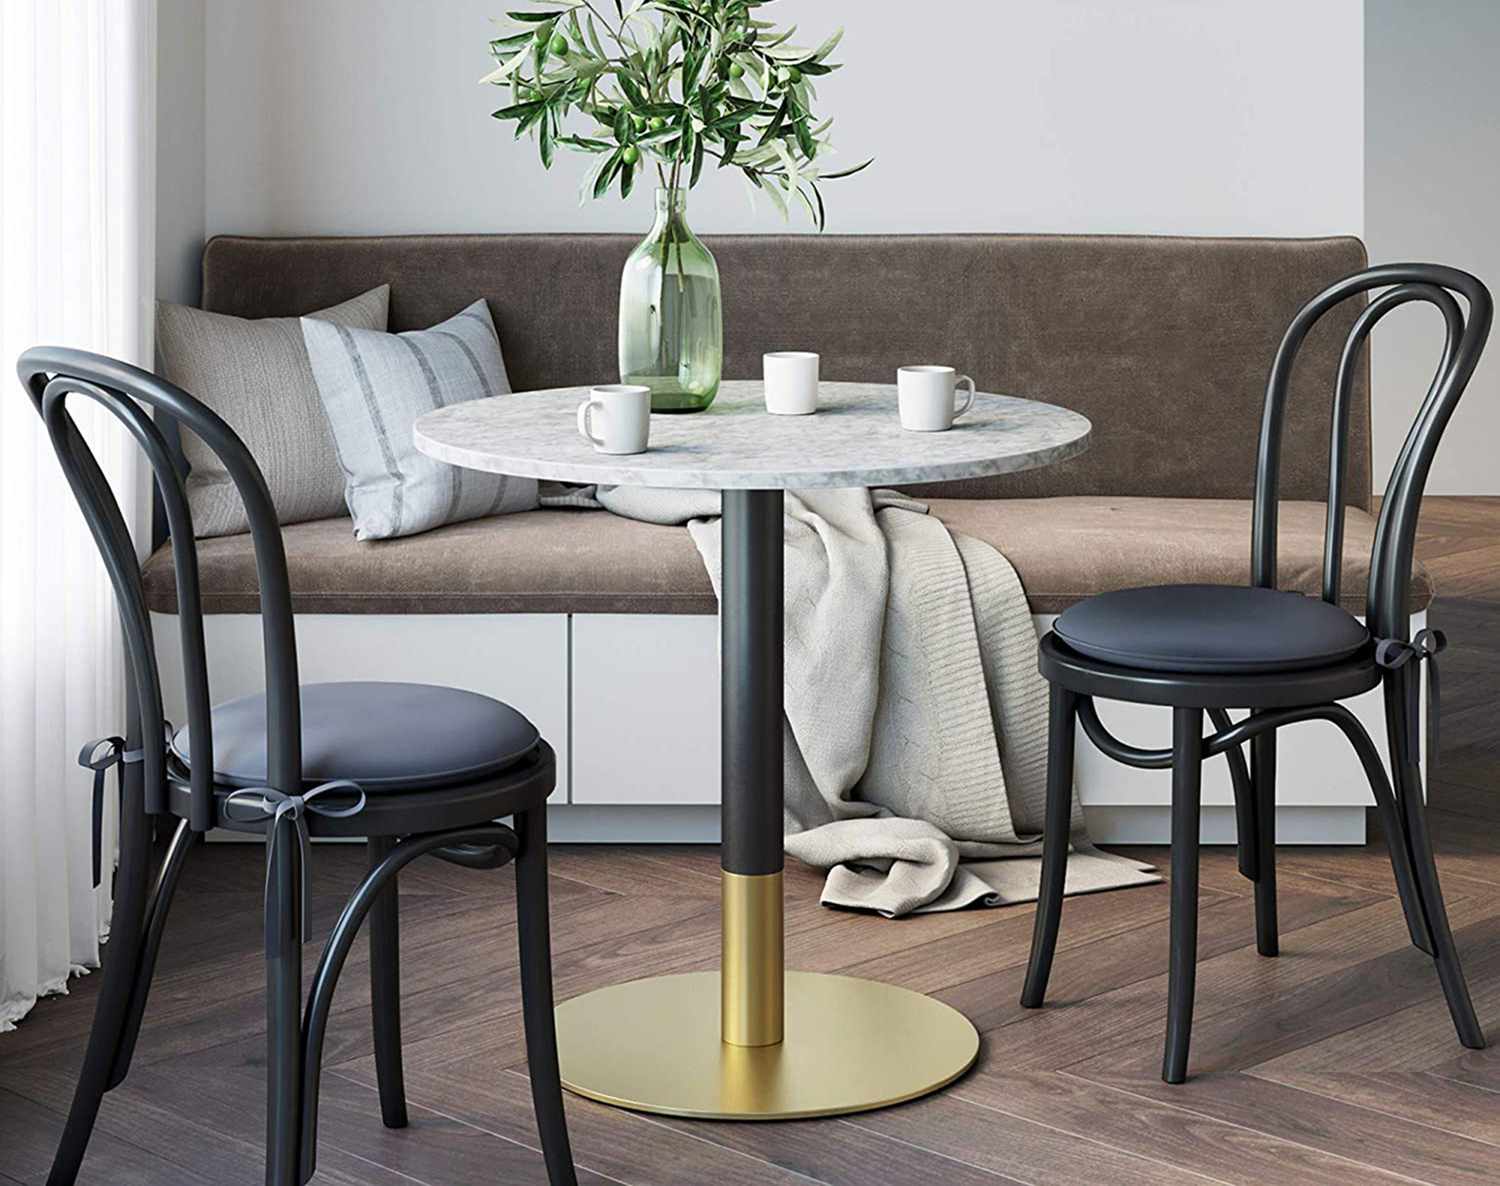 8 Best Dining Tables For Small Spaces, How Many Chairs Fit Around A 47 Inch Table